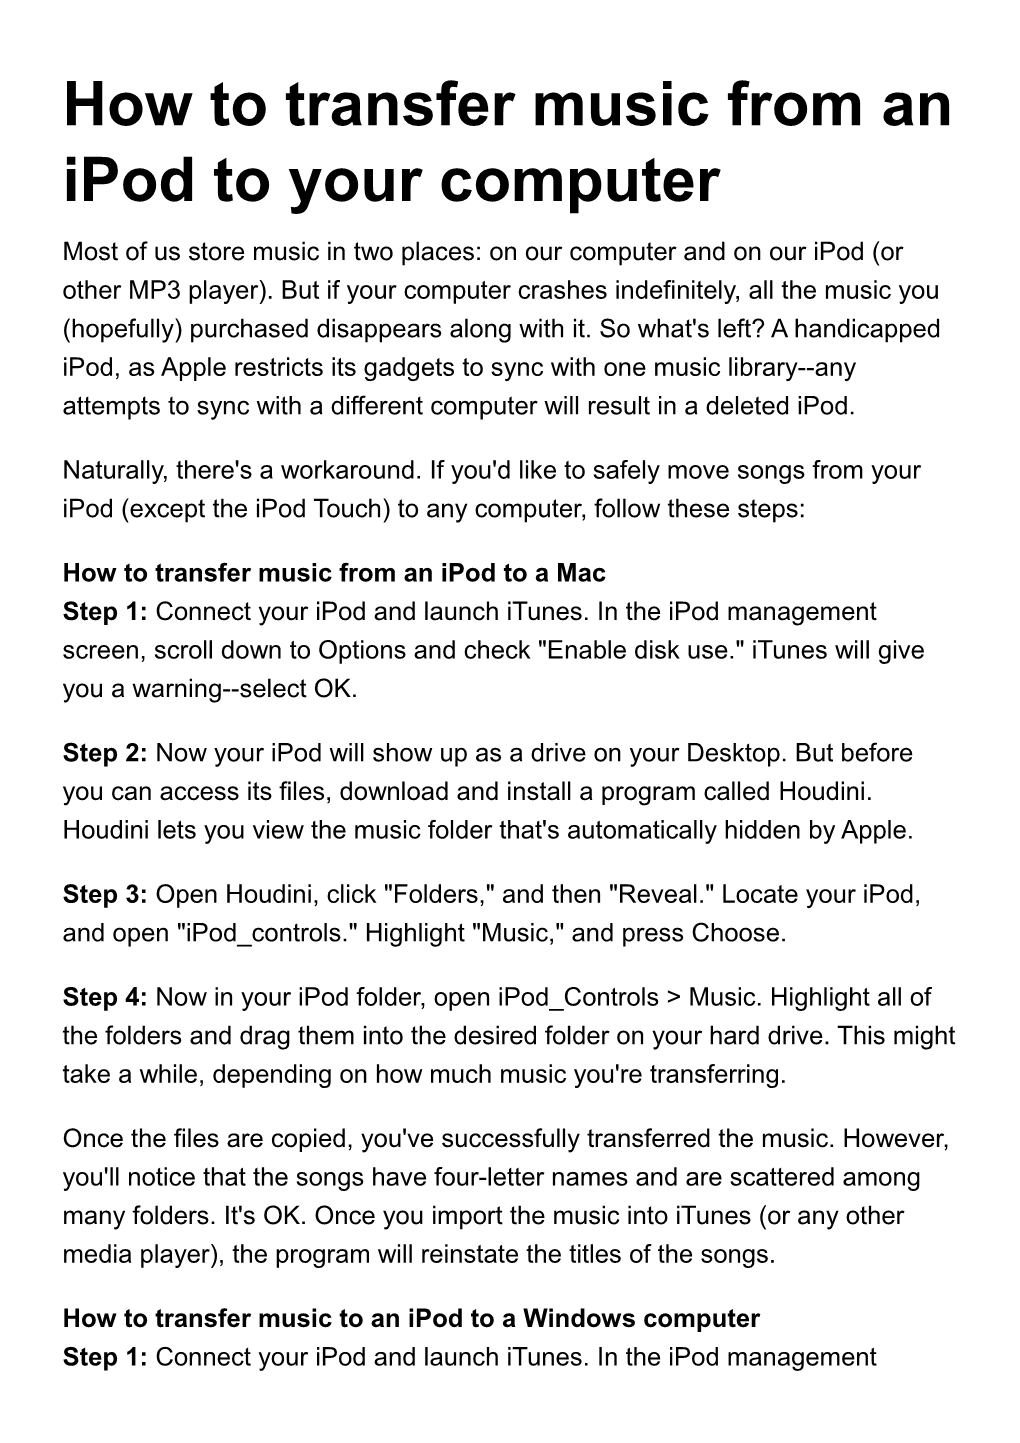 How to Transfer Music from an Ipod to Your Computer